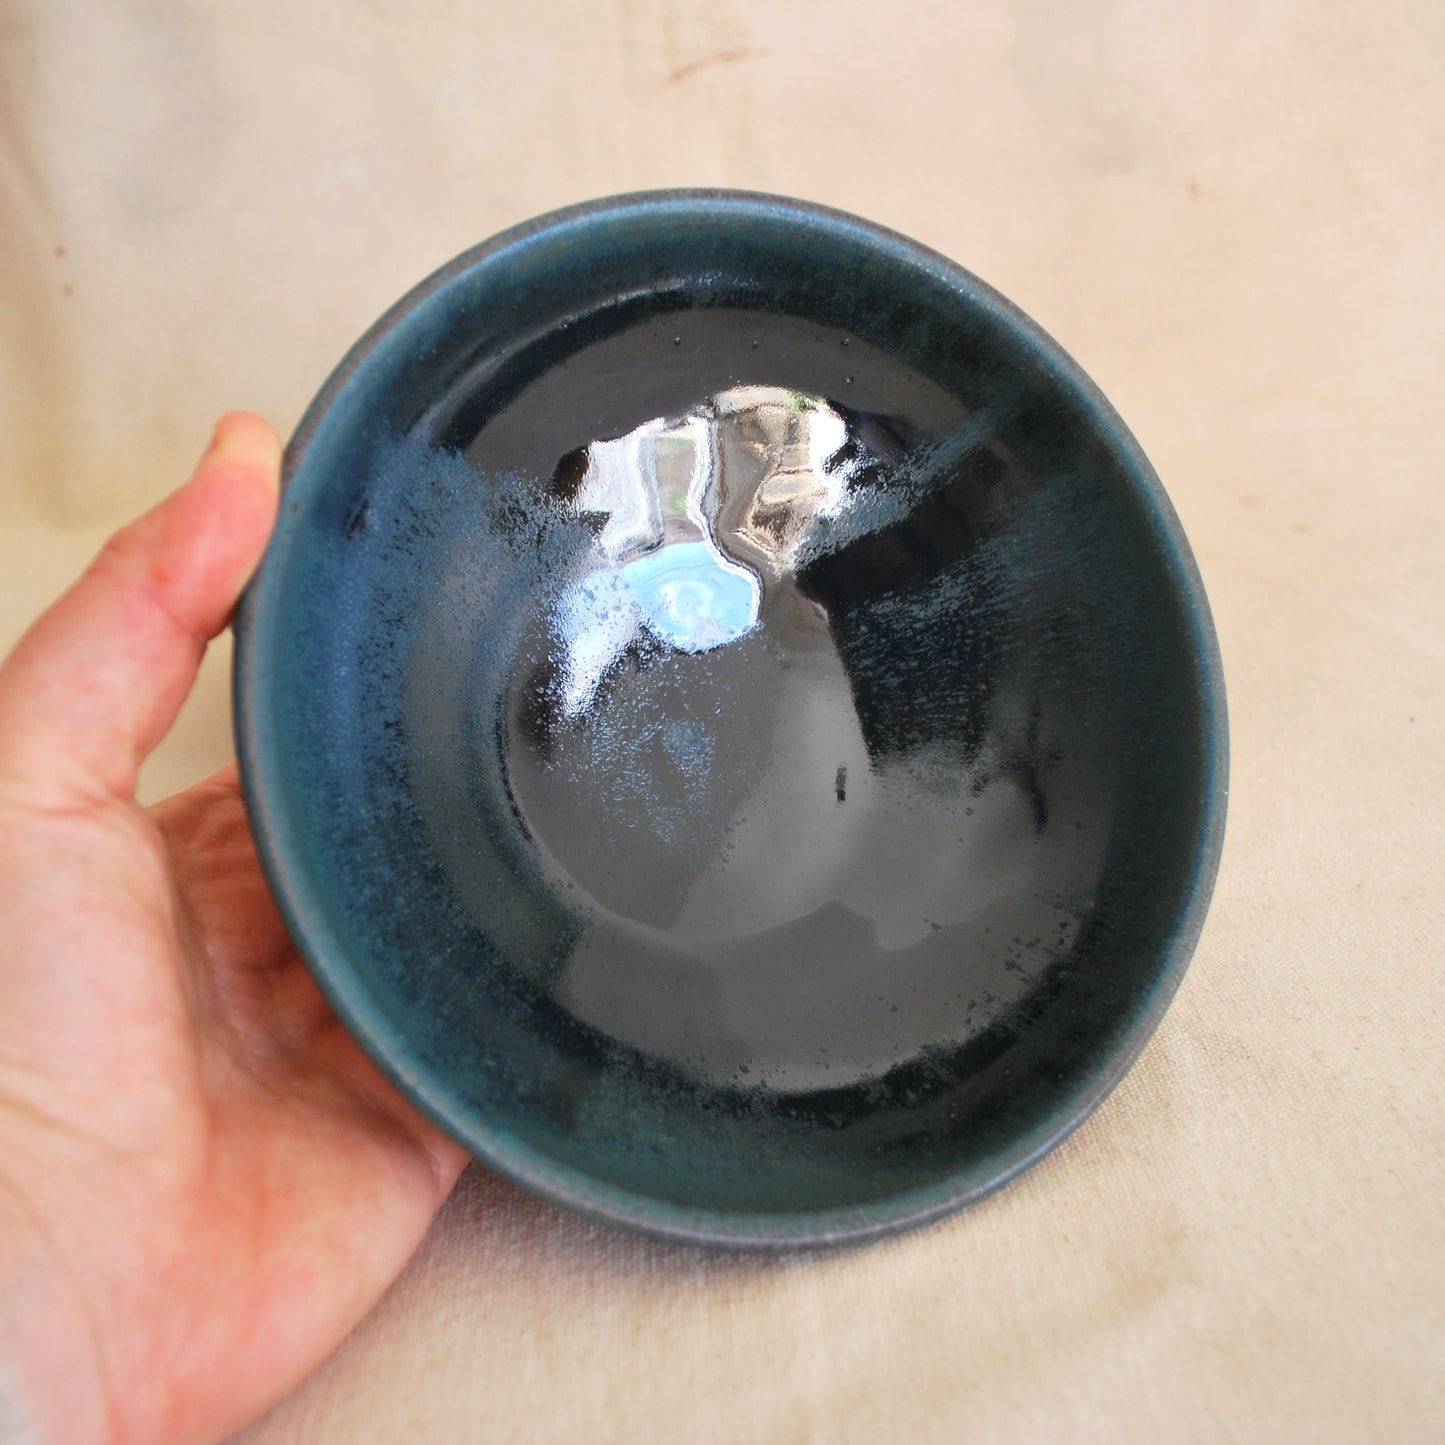 Small Bowl in Teal